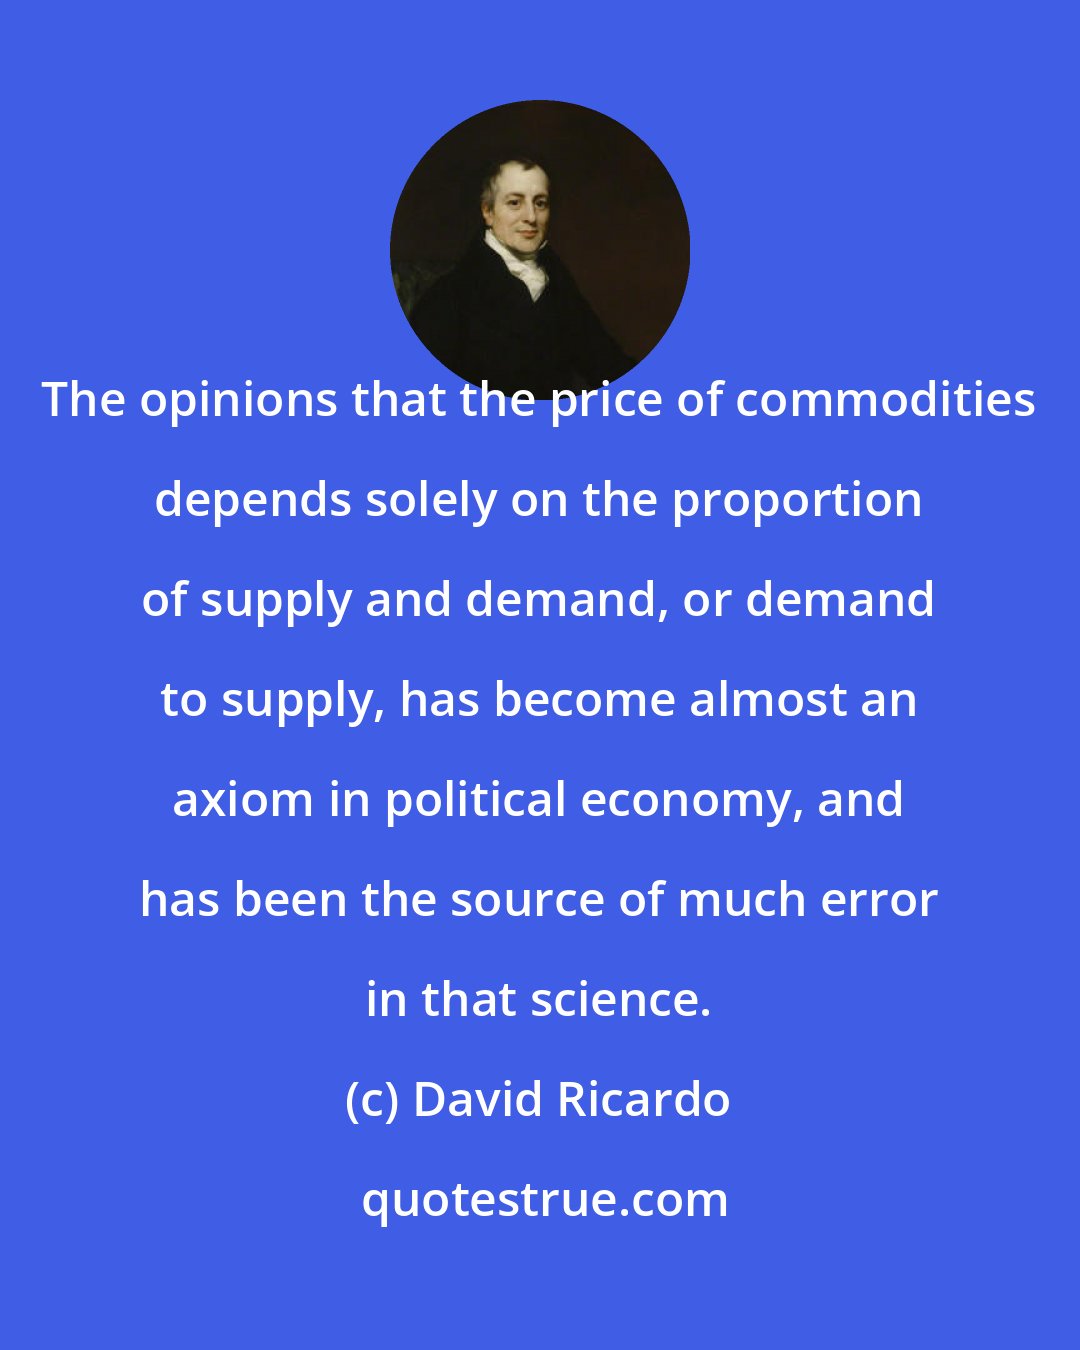 David Ricardo: The opinions that the price of commodities depends solely on the proportion of supply and demand, or demand to supply, has become almost an axiom in political economy, and has been the source of much error in that science.